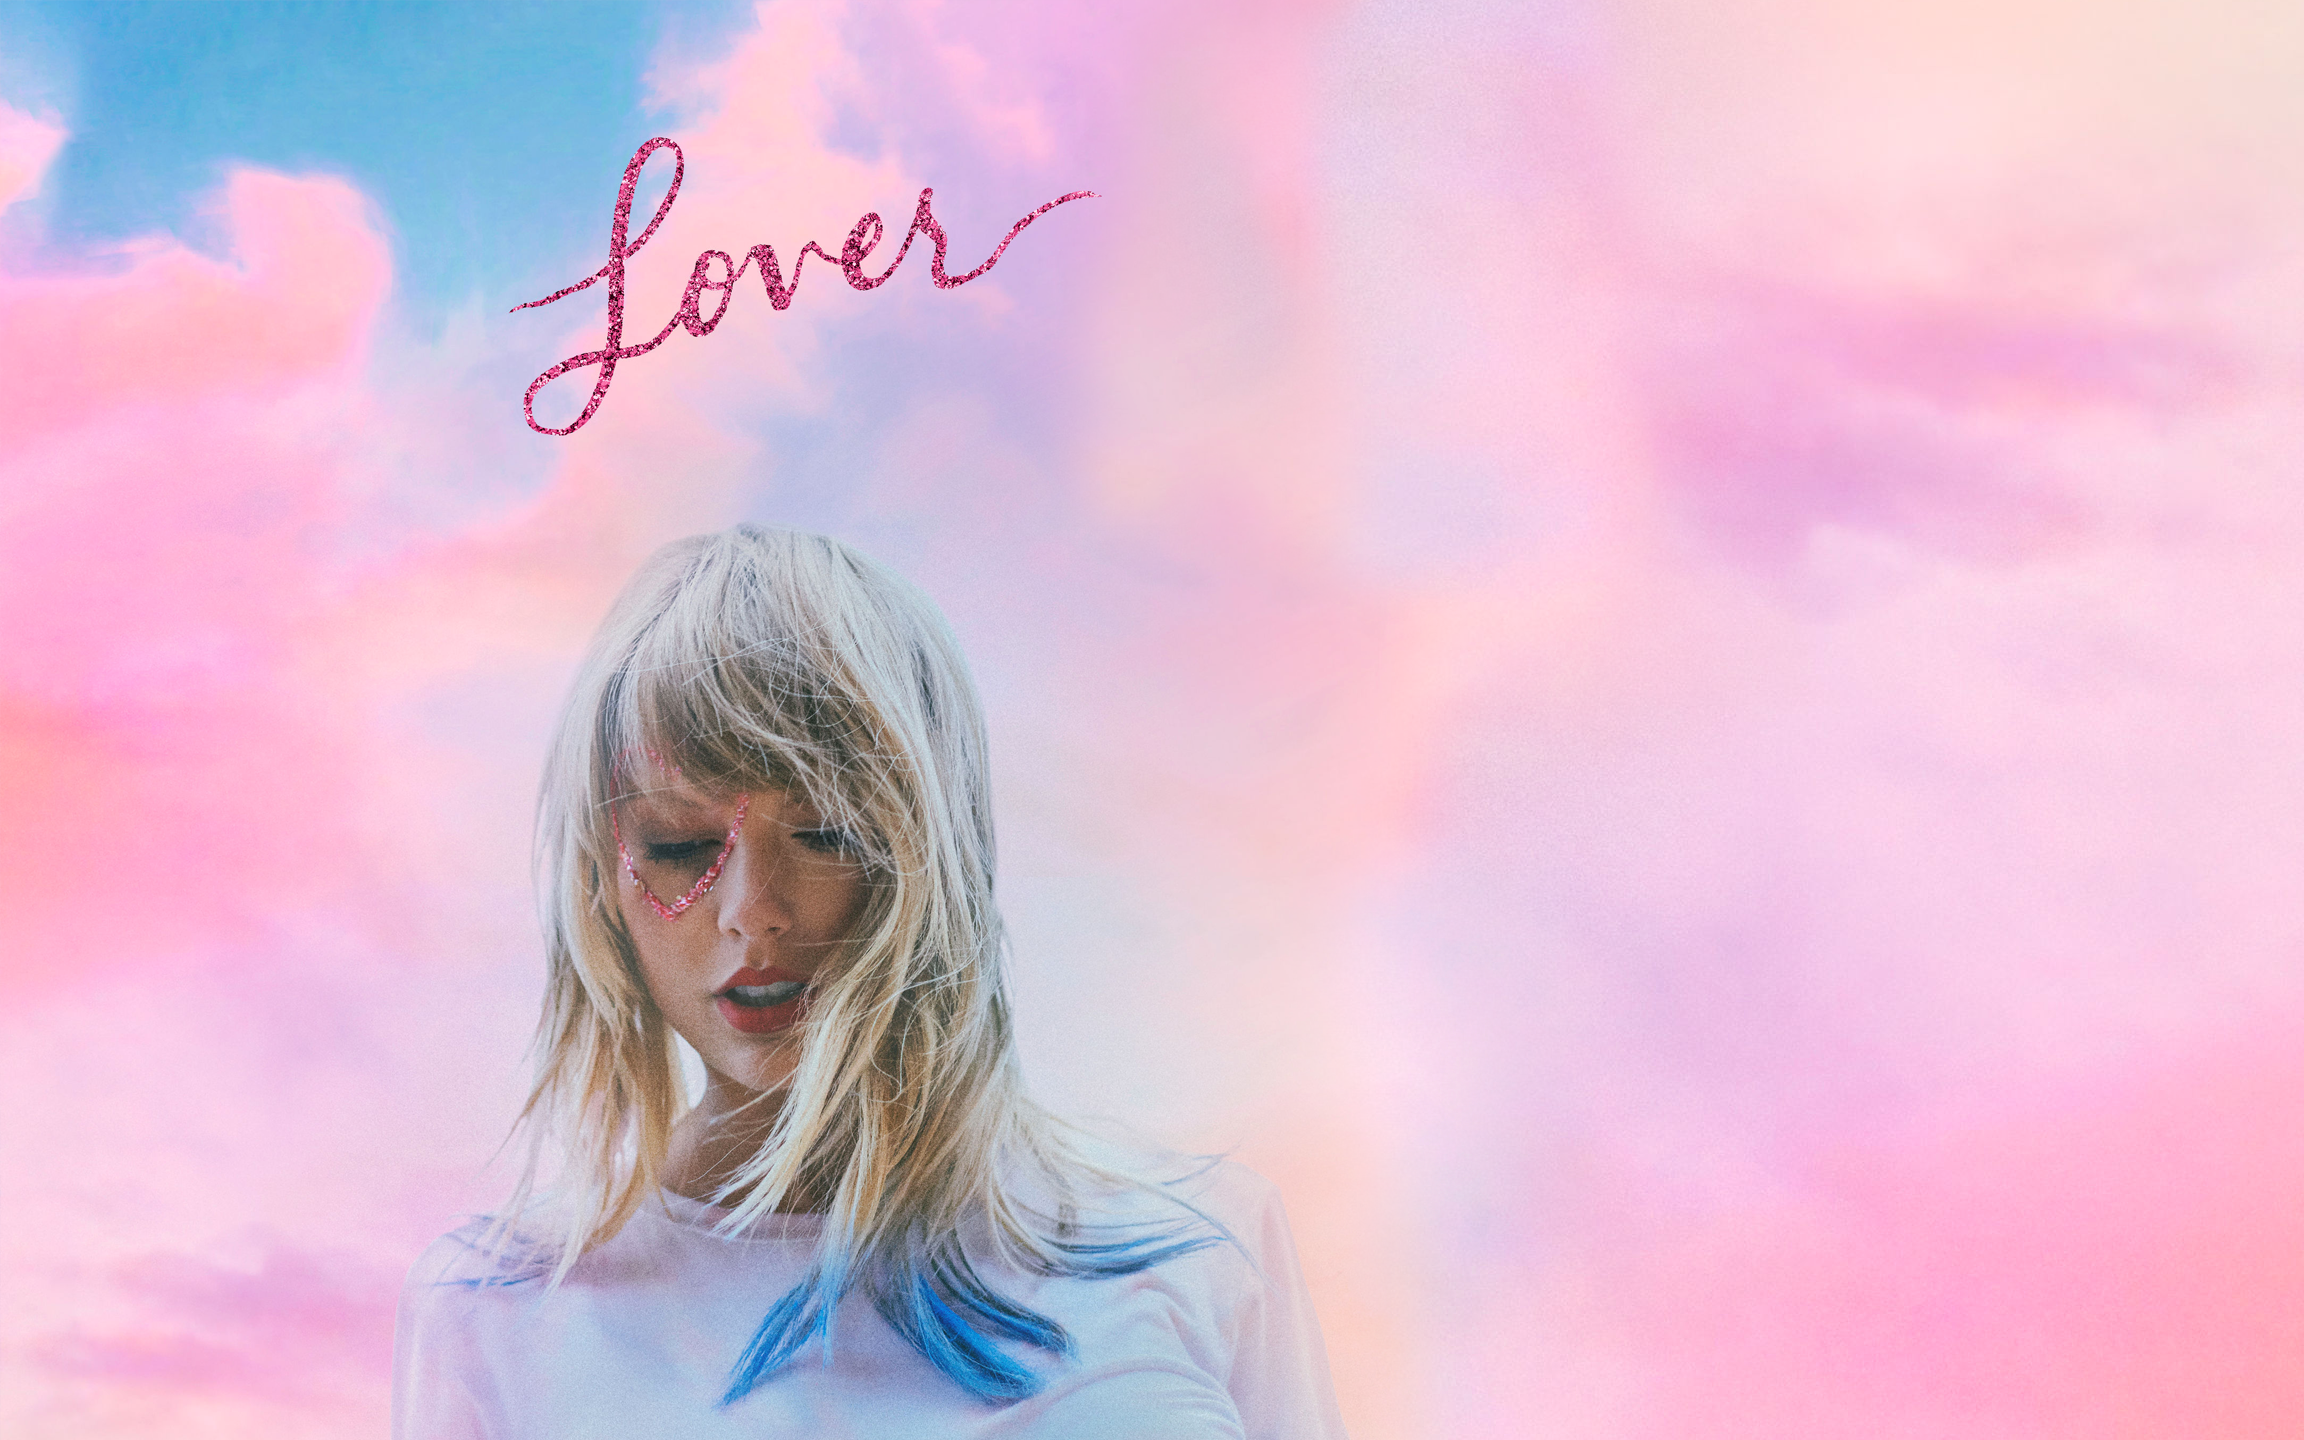 Made a desktop wallpaper featuring the Lover album cover and